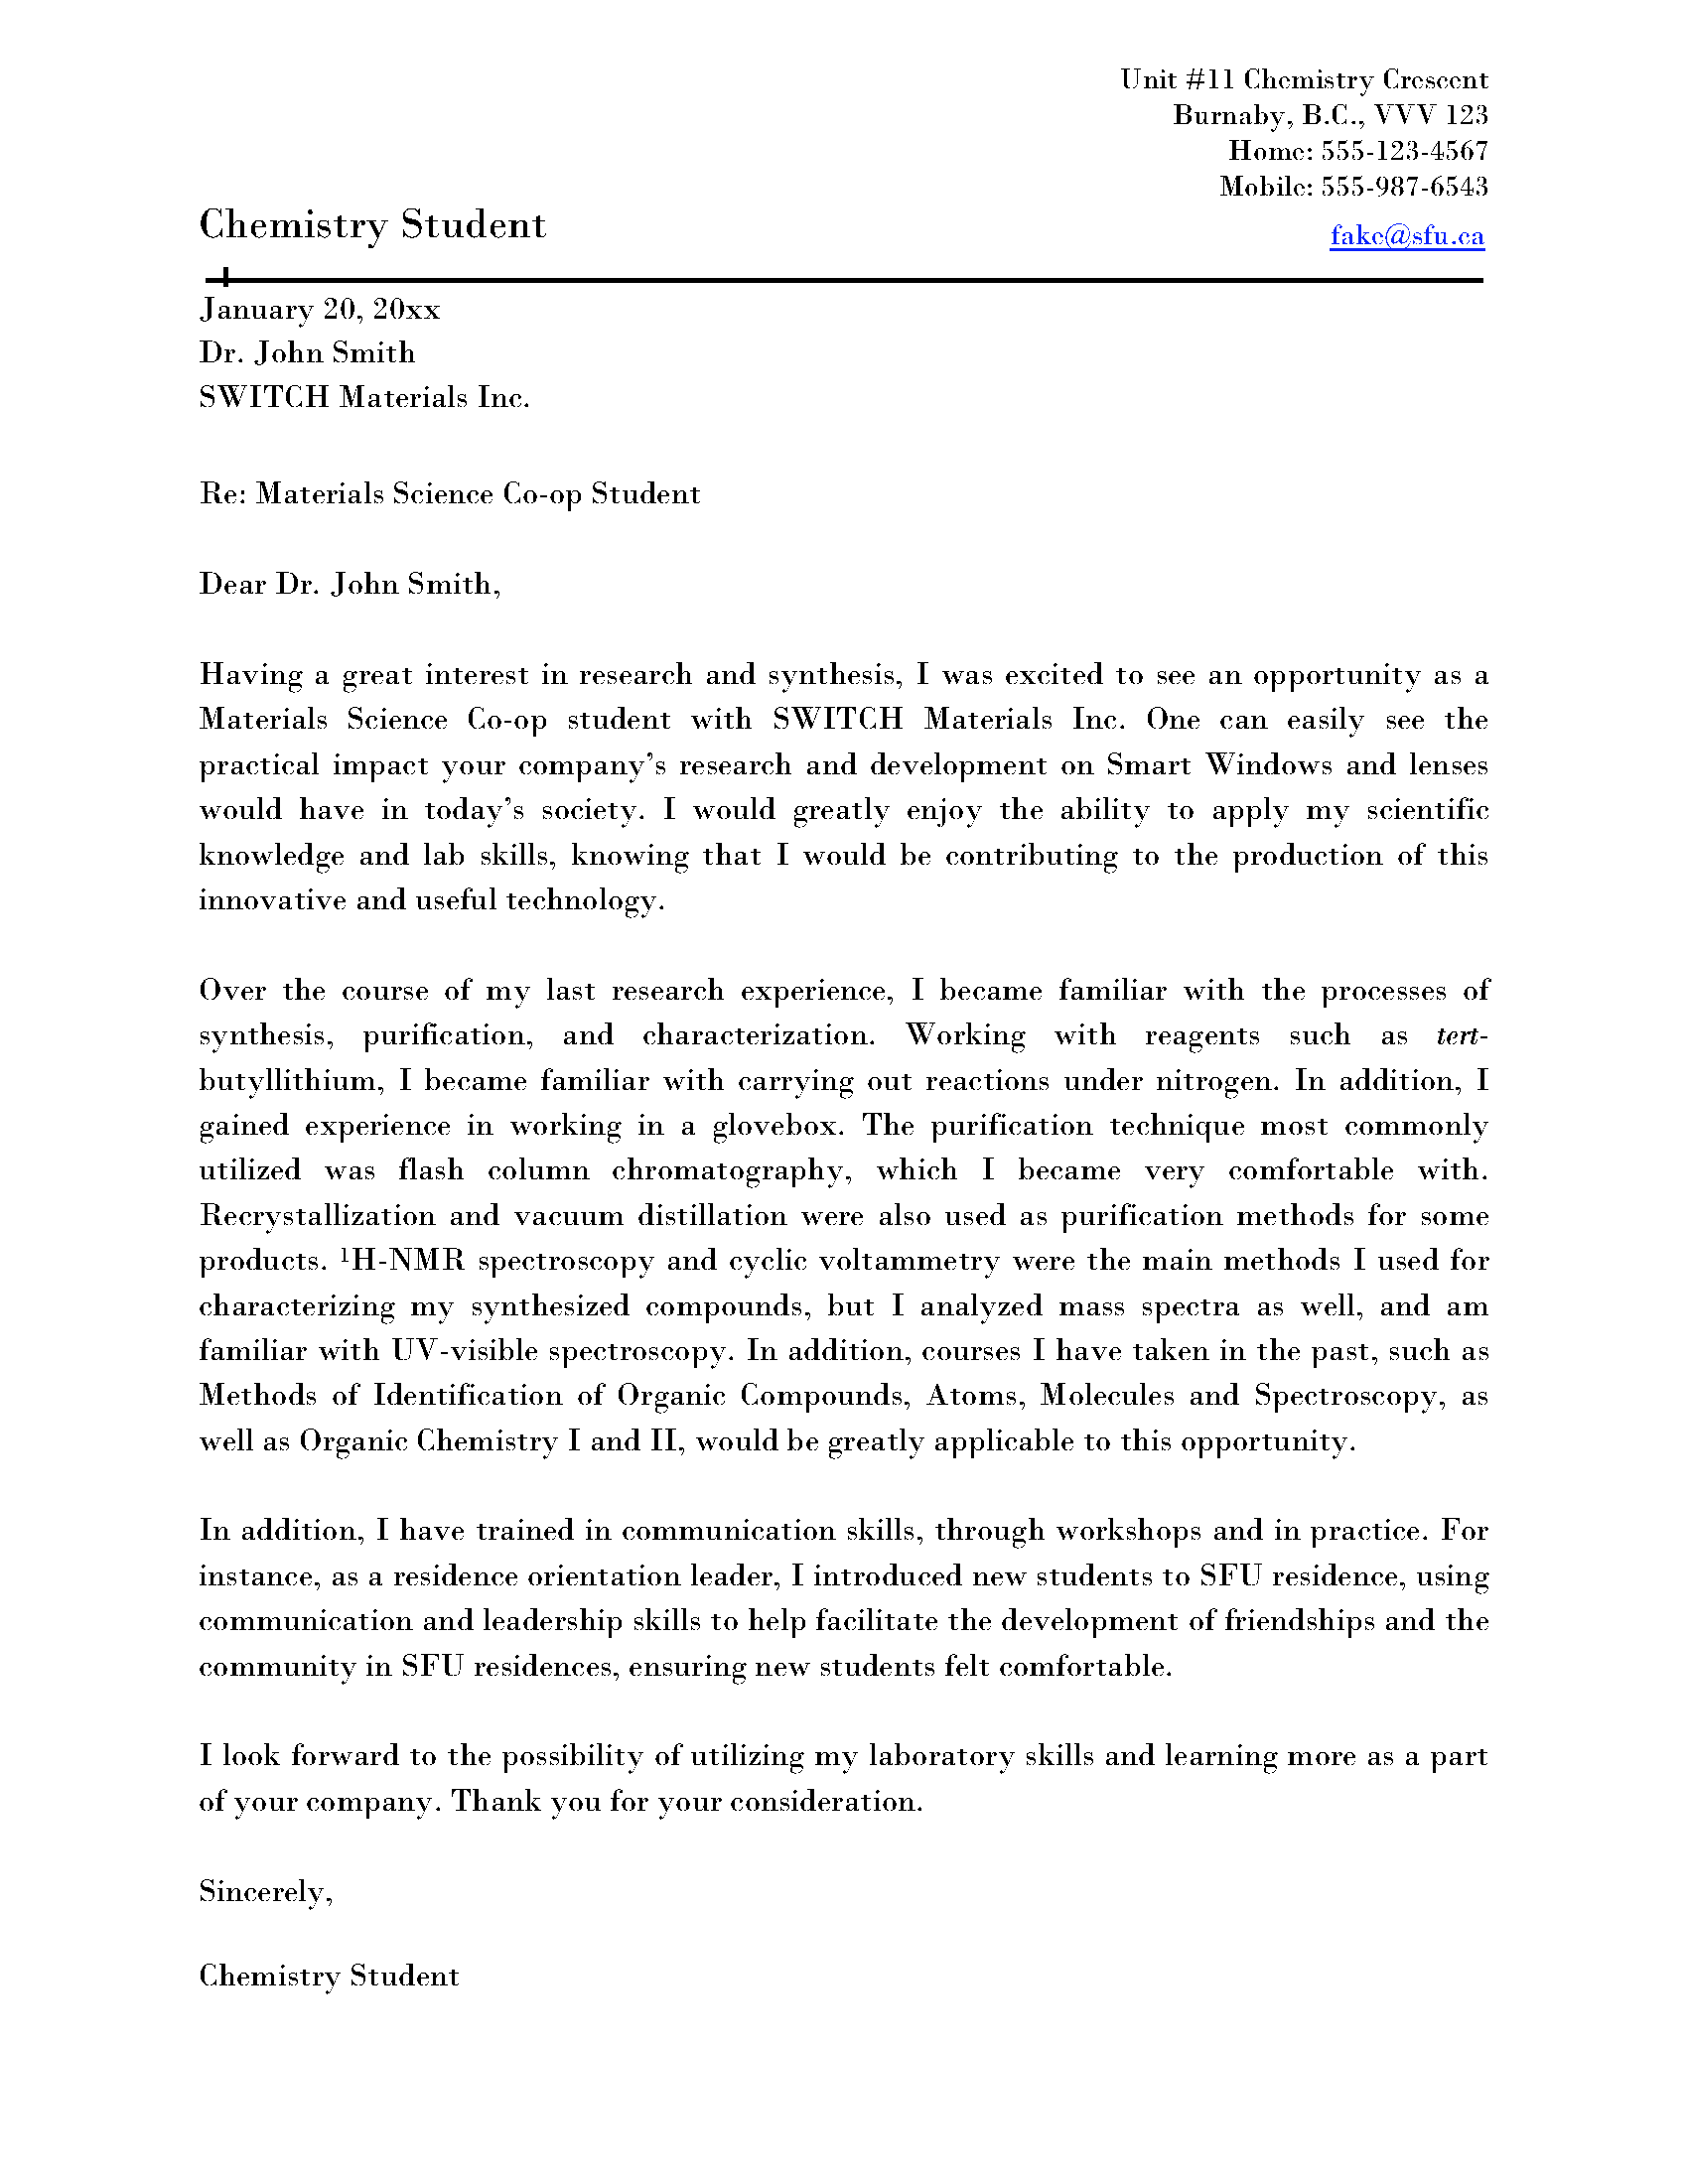 nature chemistry cover letter